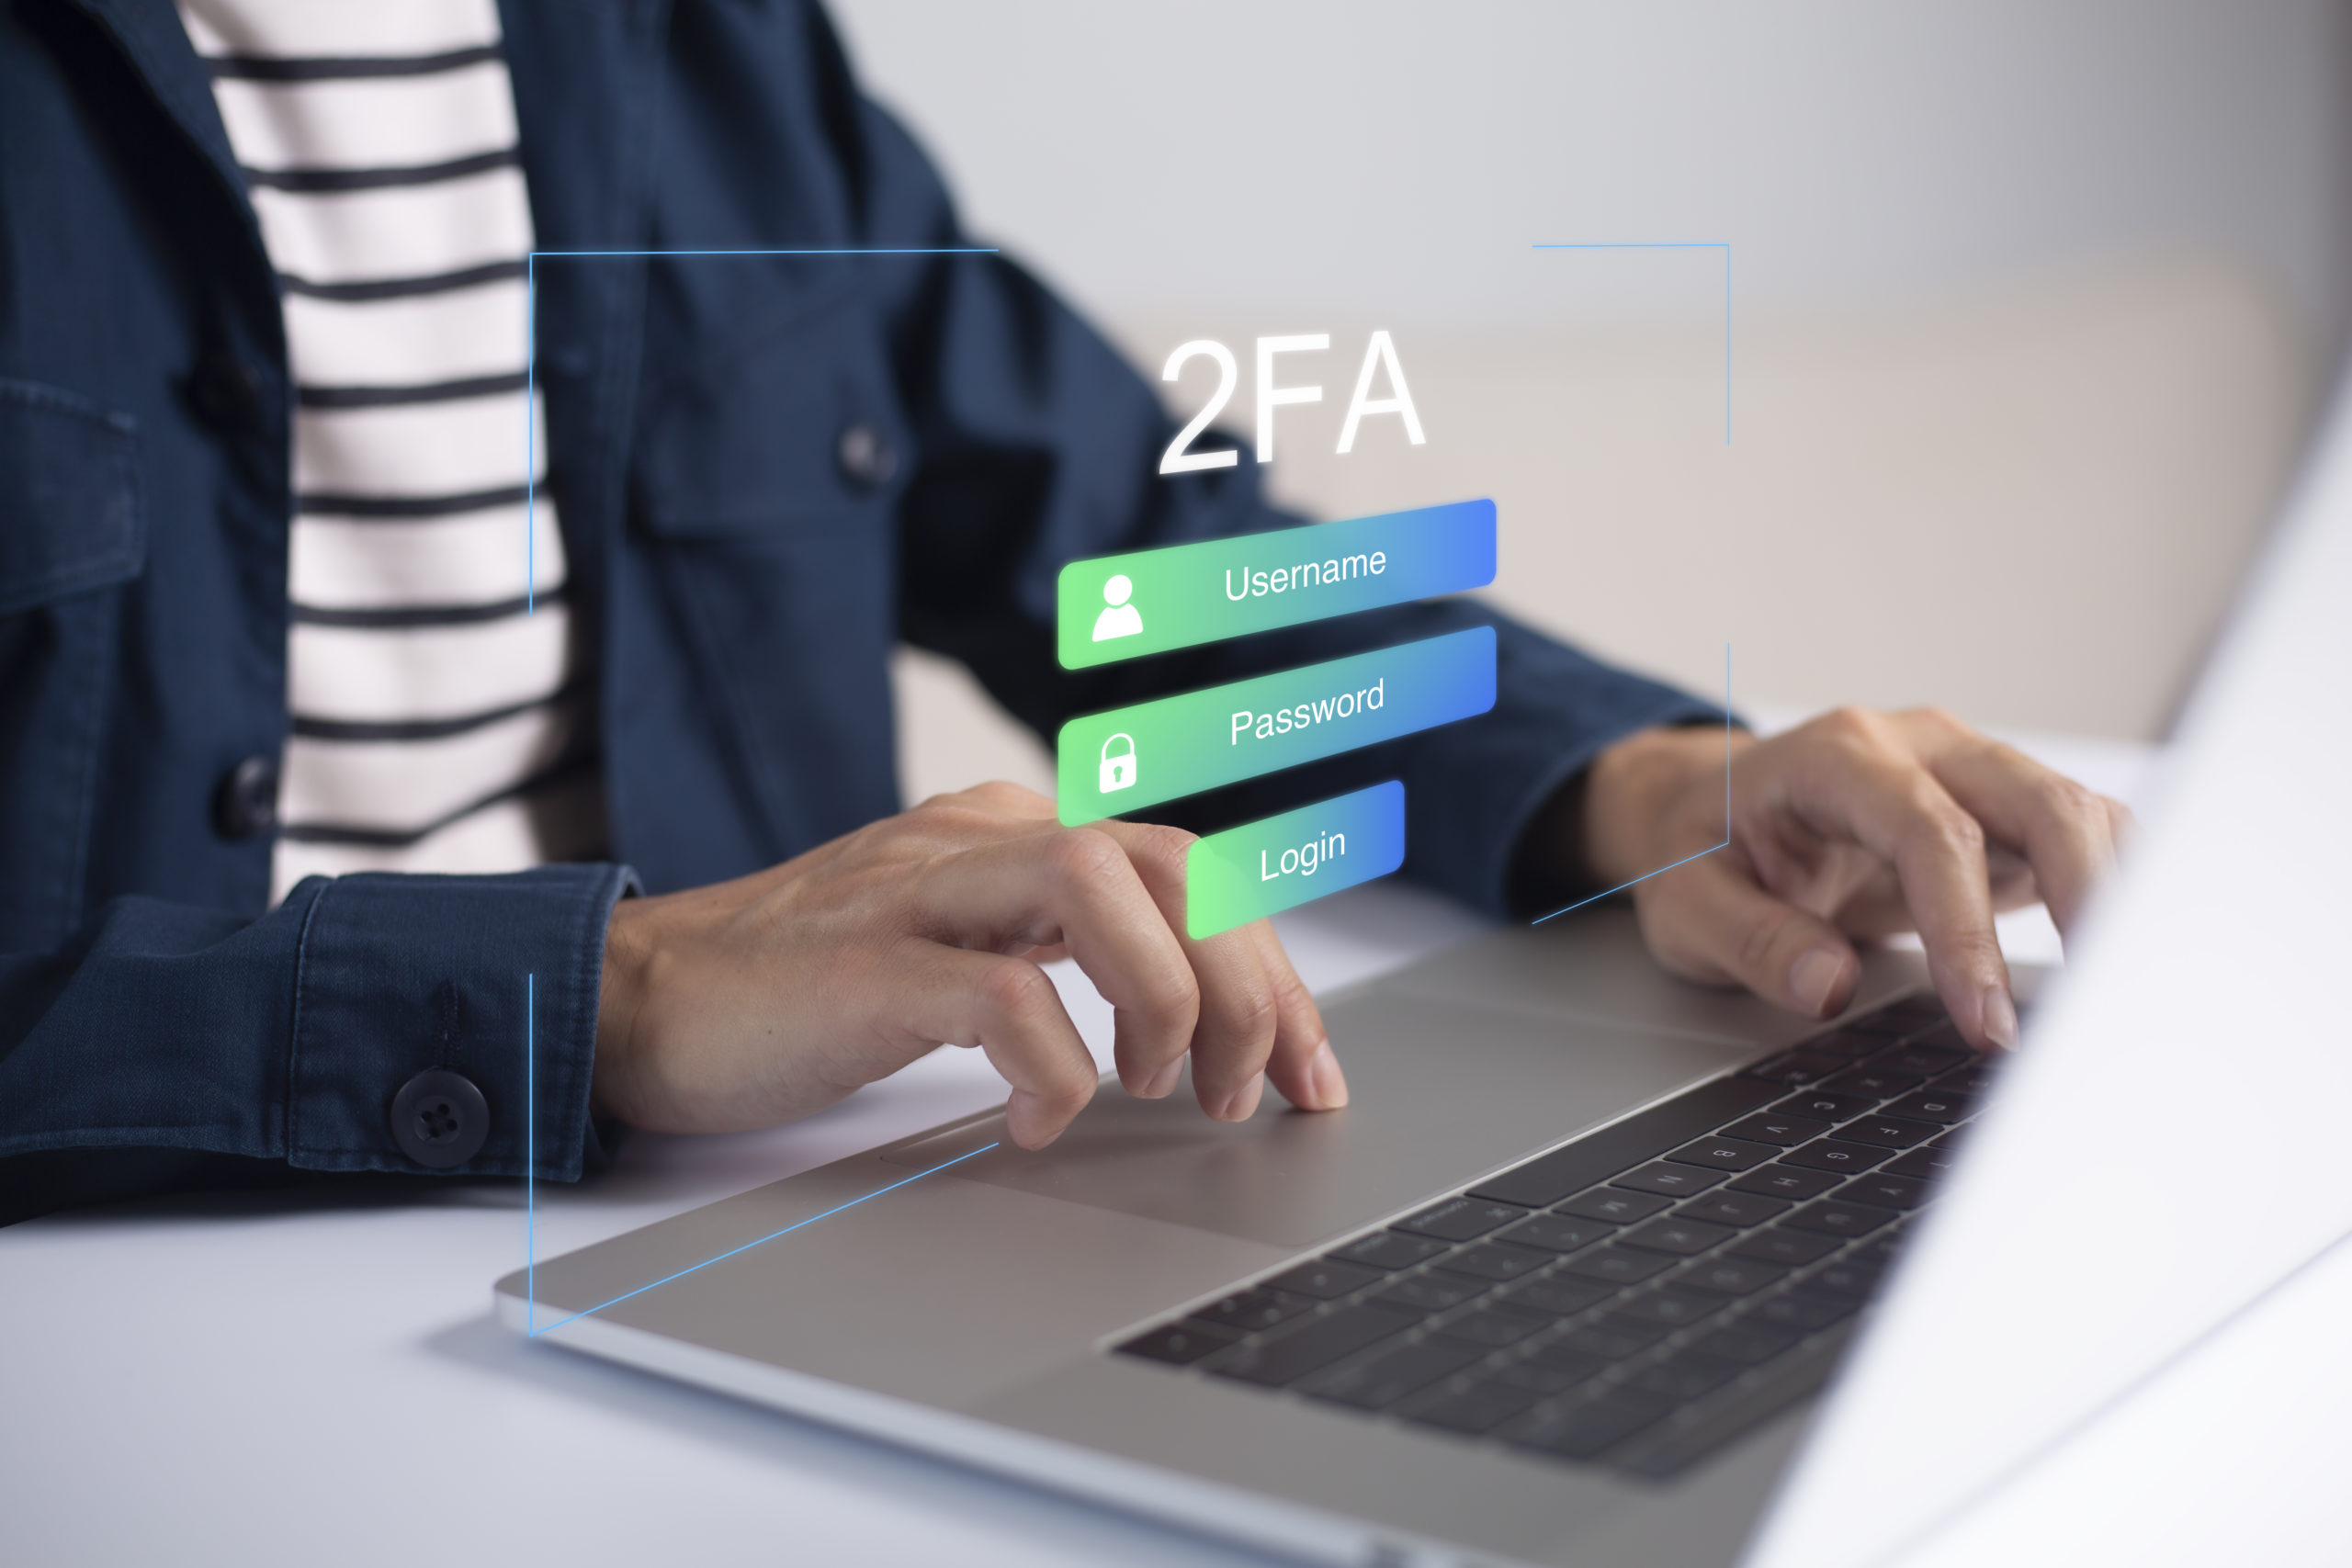 Two Factor Authentication (2FA) | Is Your Mobile Device Inviting Cyber-criminals